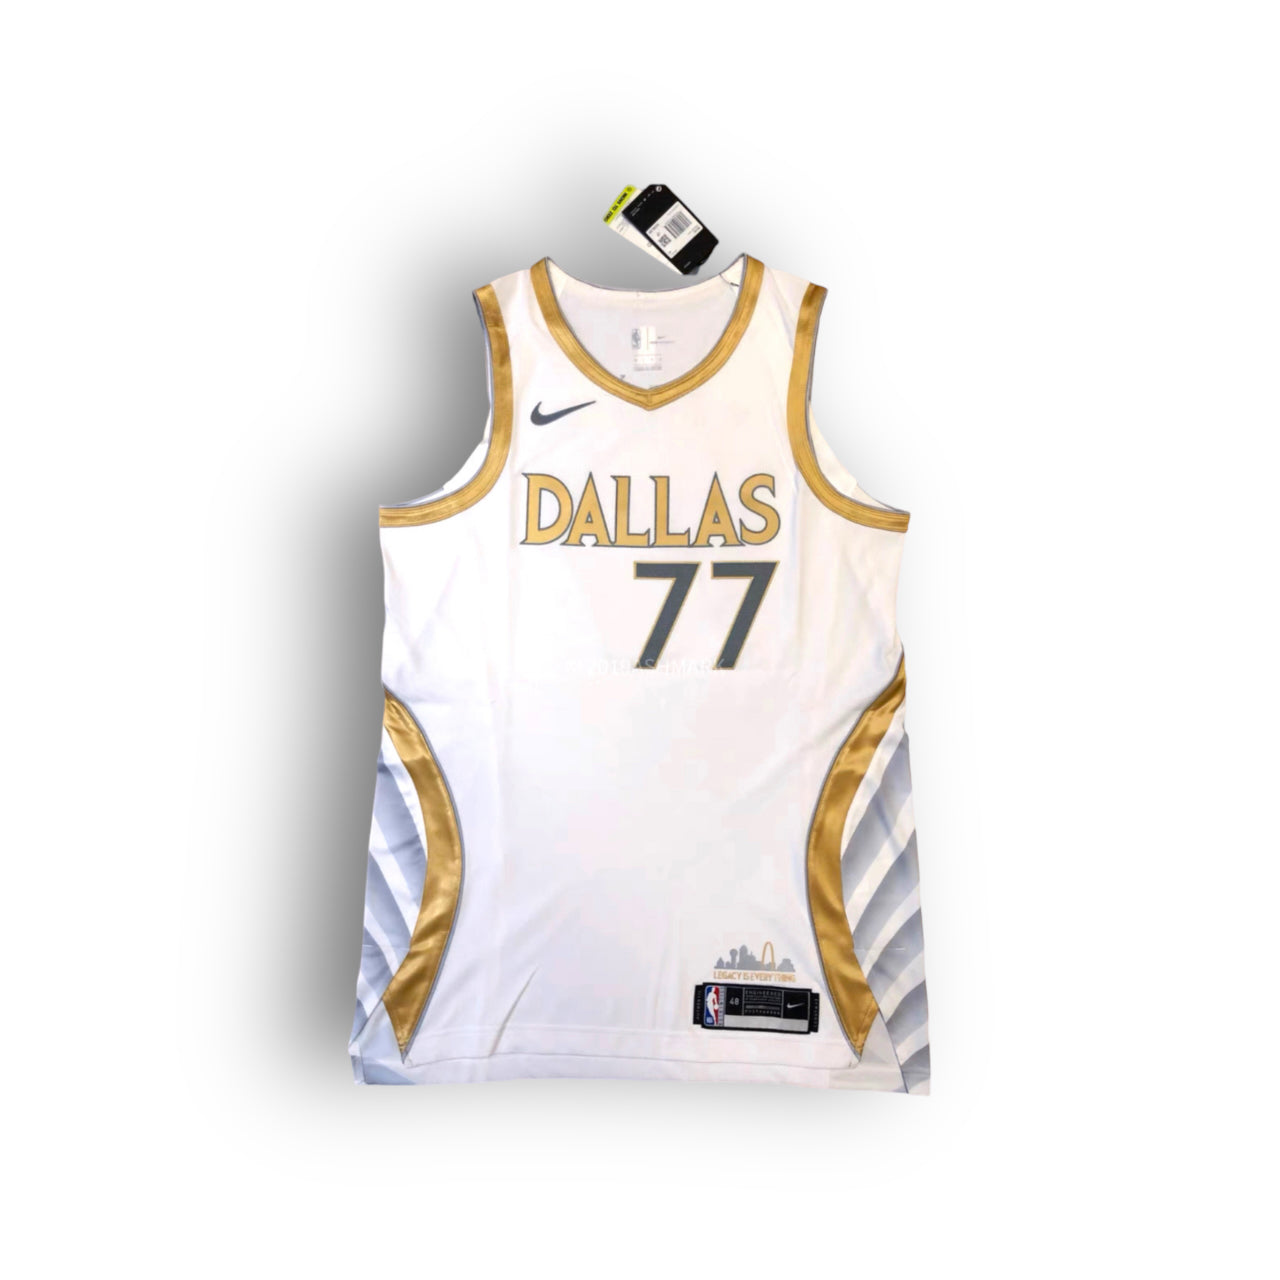 Luka Doncic Dallas Mavericks 2020-2021 City Edition Nike Authentic Jersey - White/Gold - Hoop Jersey Store